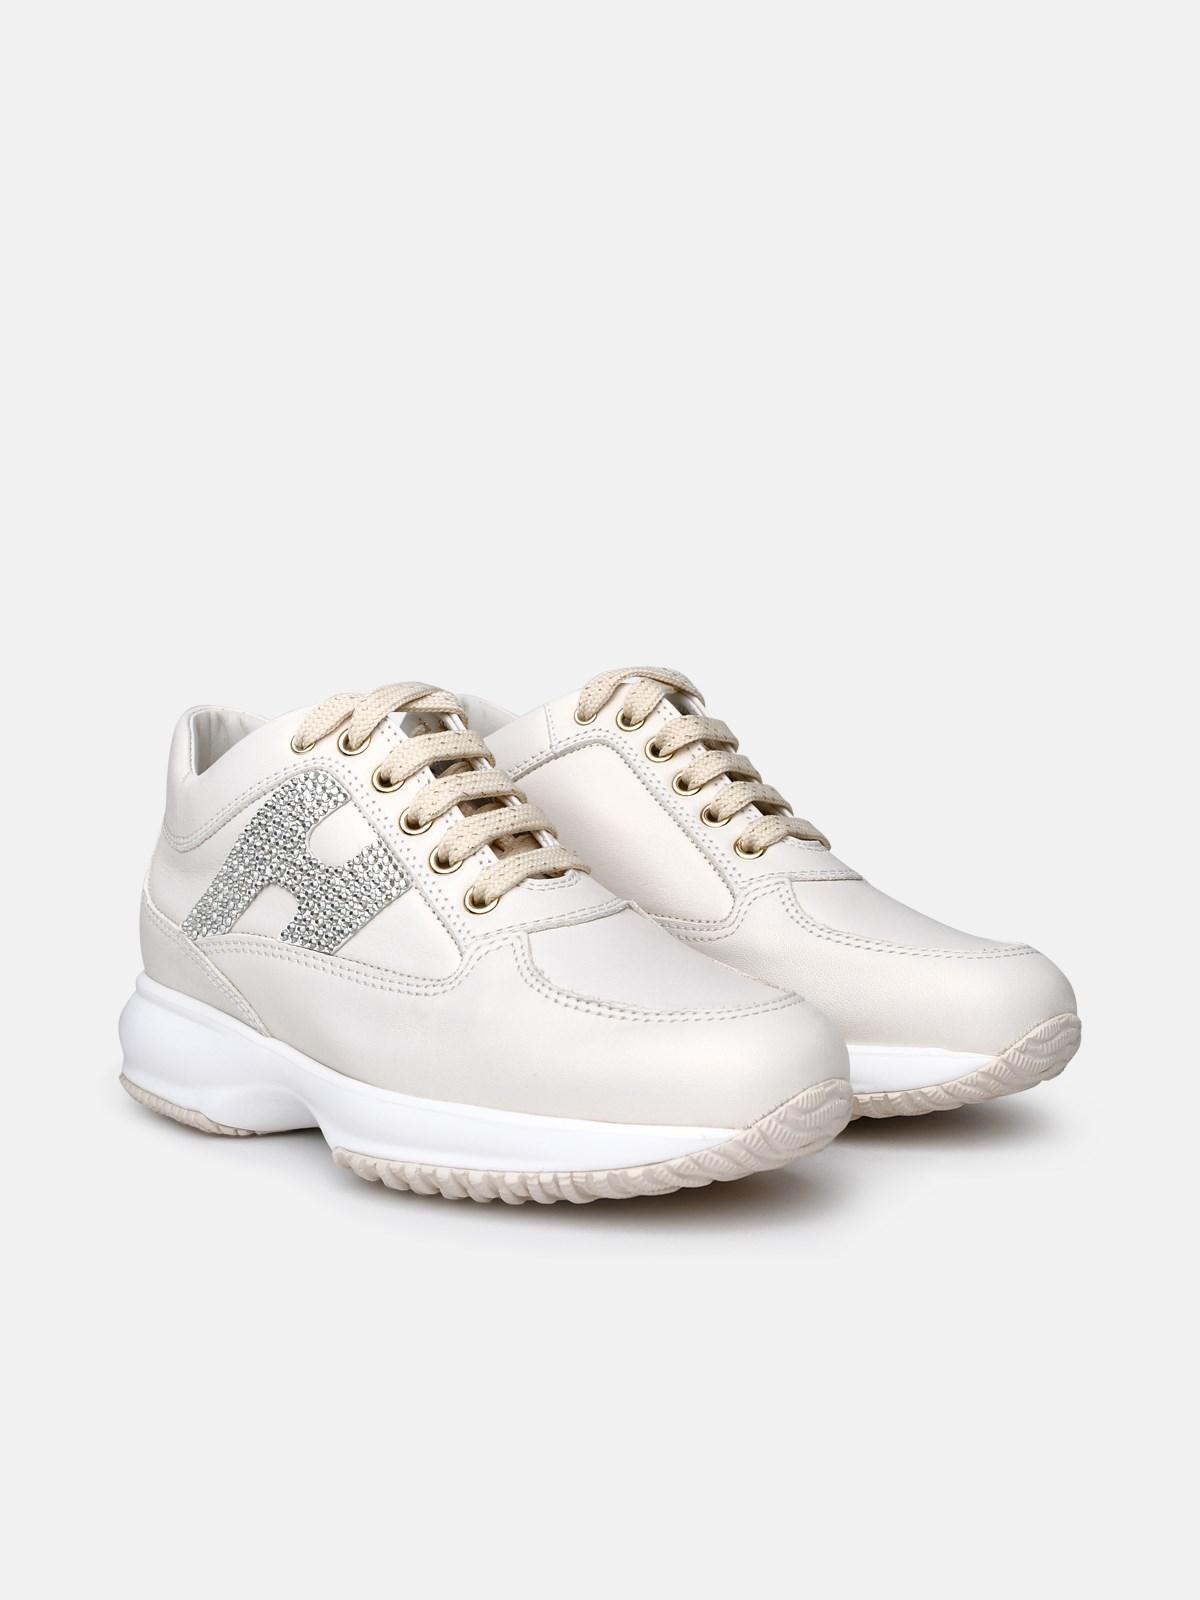 Hogan Leather Sneakers White | Lyst